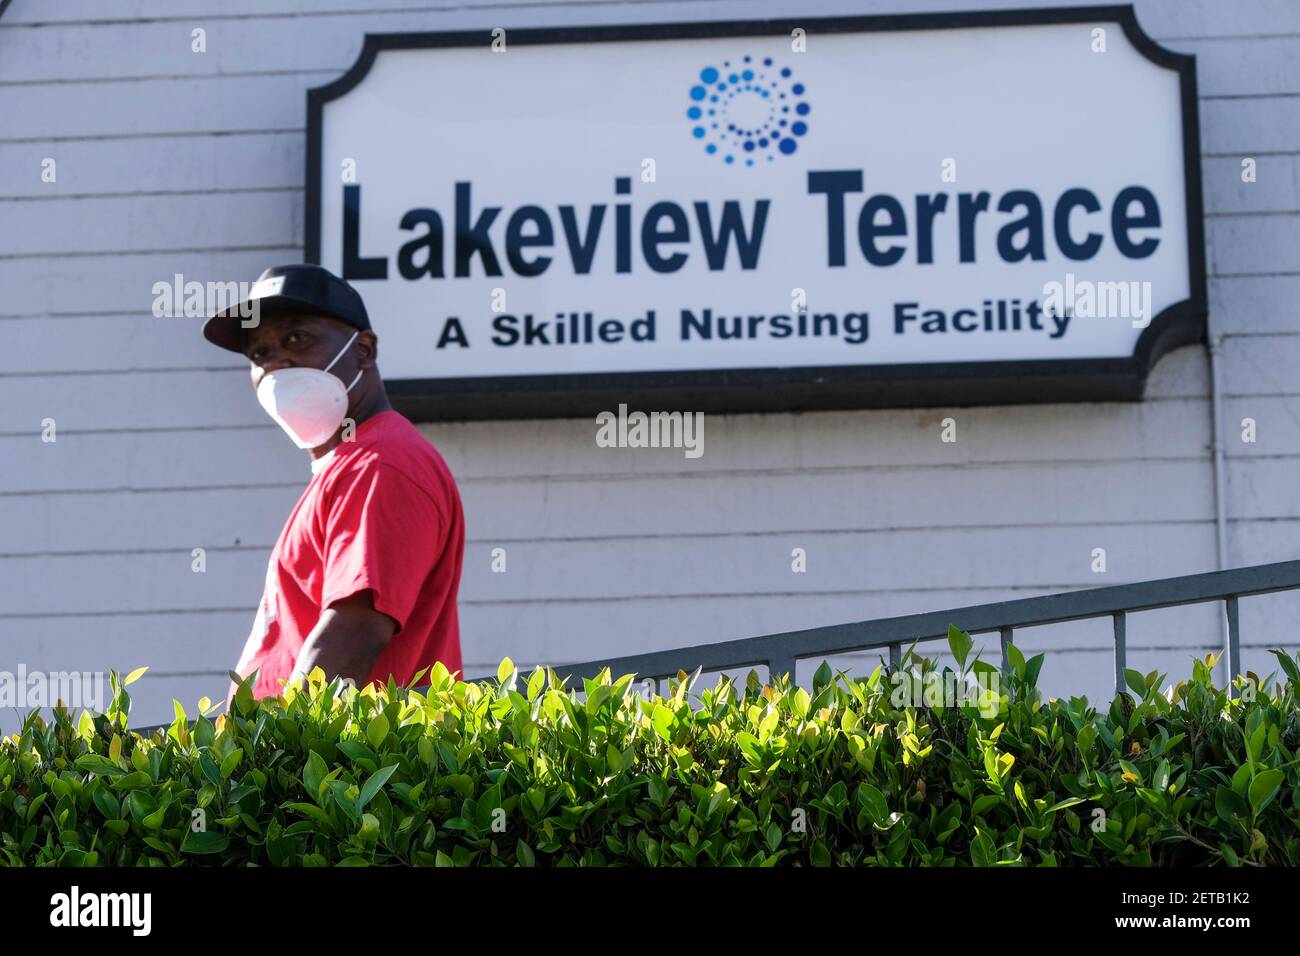 Los Angeles, California, USA. 1st Mar, 2021. A man waeing a face mask is seen at Lakeview Terrace Skilled Nursing Facility in Los Angeles, March 1, 2021. Los Angeles City Attorney Mike Feuer announced today his office reached a settlement with Lakeview Terrace Skilled Nursing Facility, which was accused of patient dumping during the COVID-19 pandemic, as well as abuse, neglect, denial of care and efforts to conceal its conduct. Credit: Ringo Chiu/ZUMA Wire/Alamy Live News Stock Photo